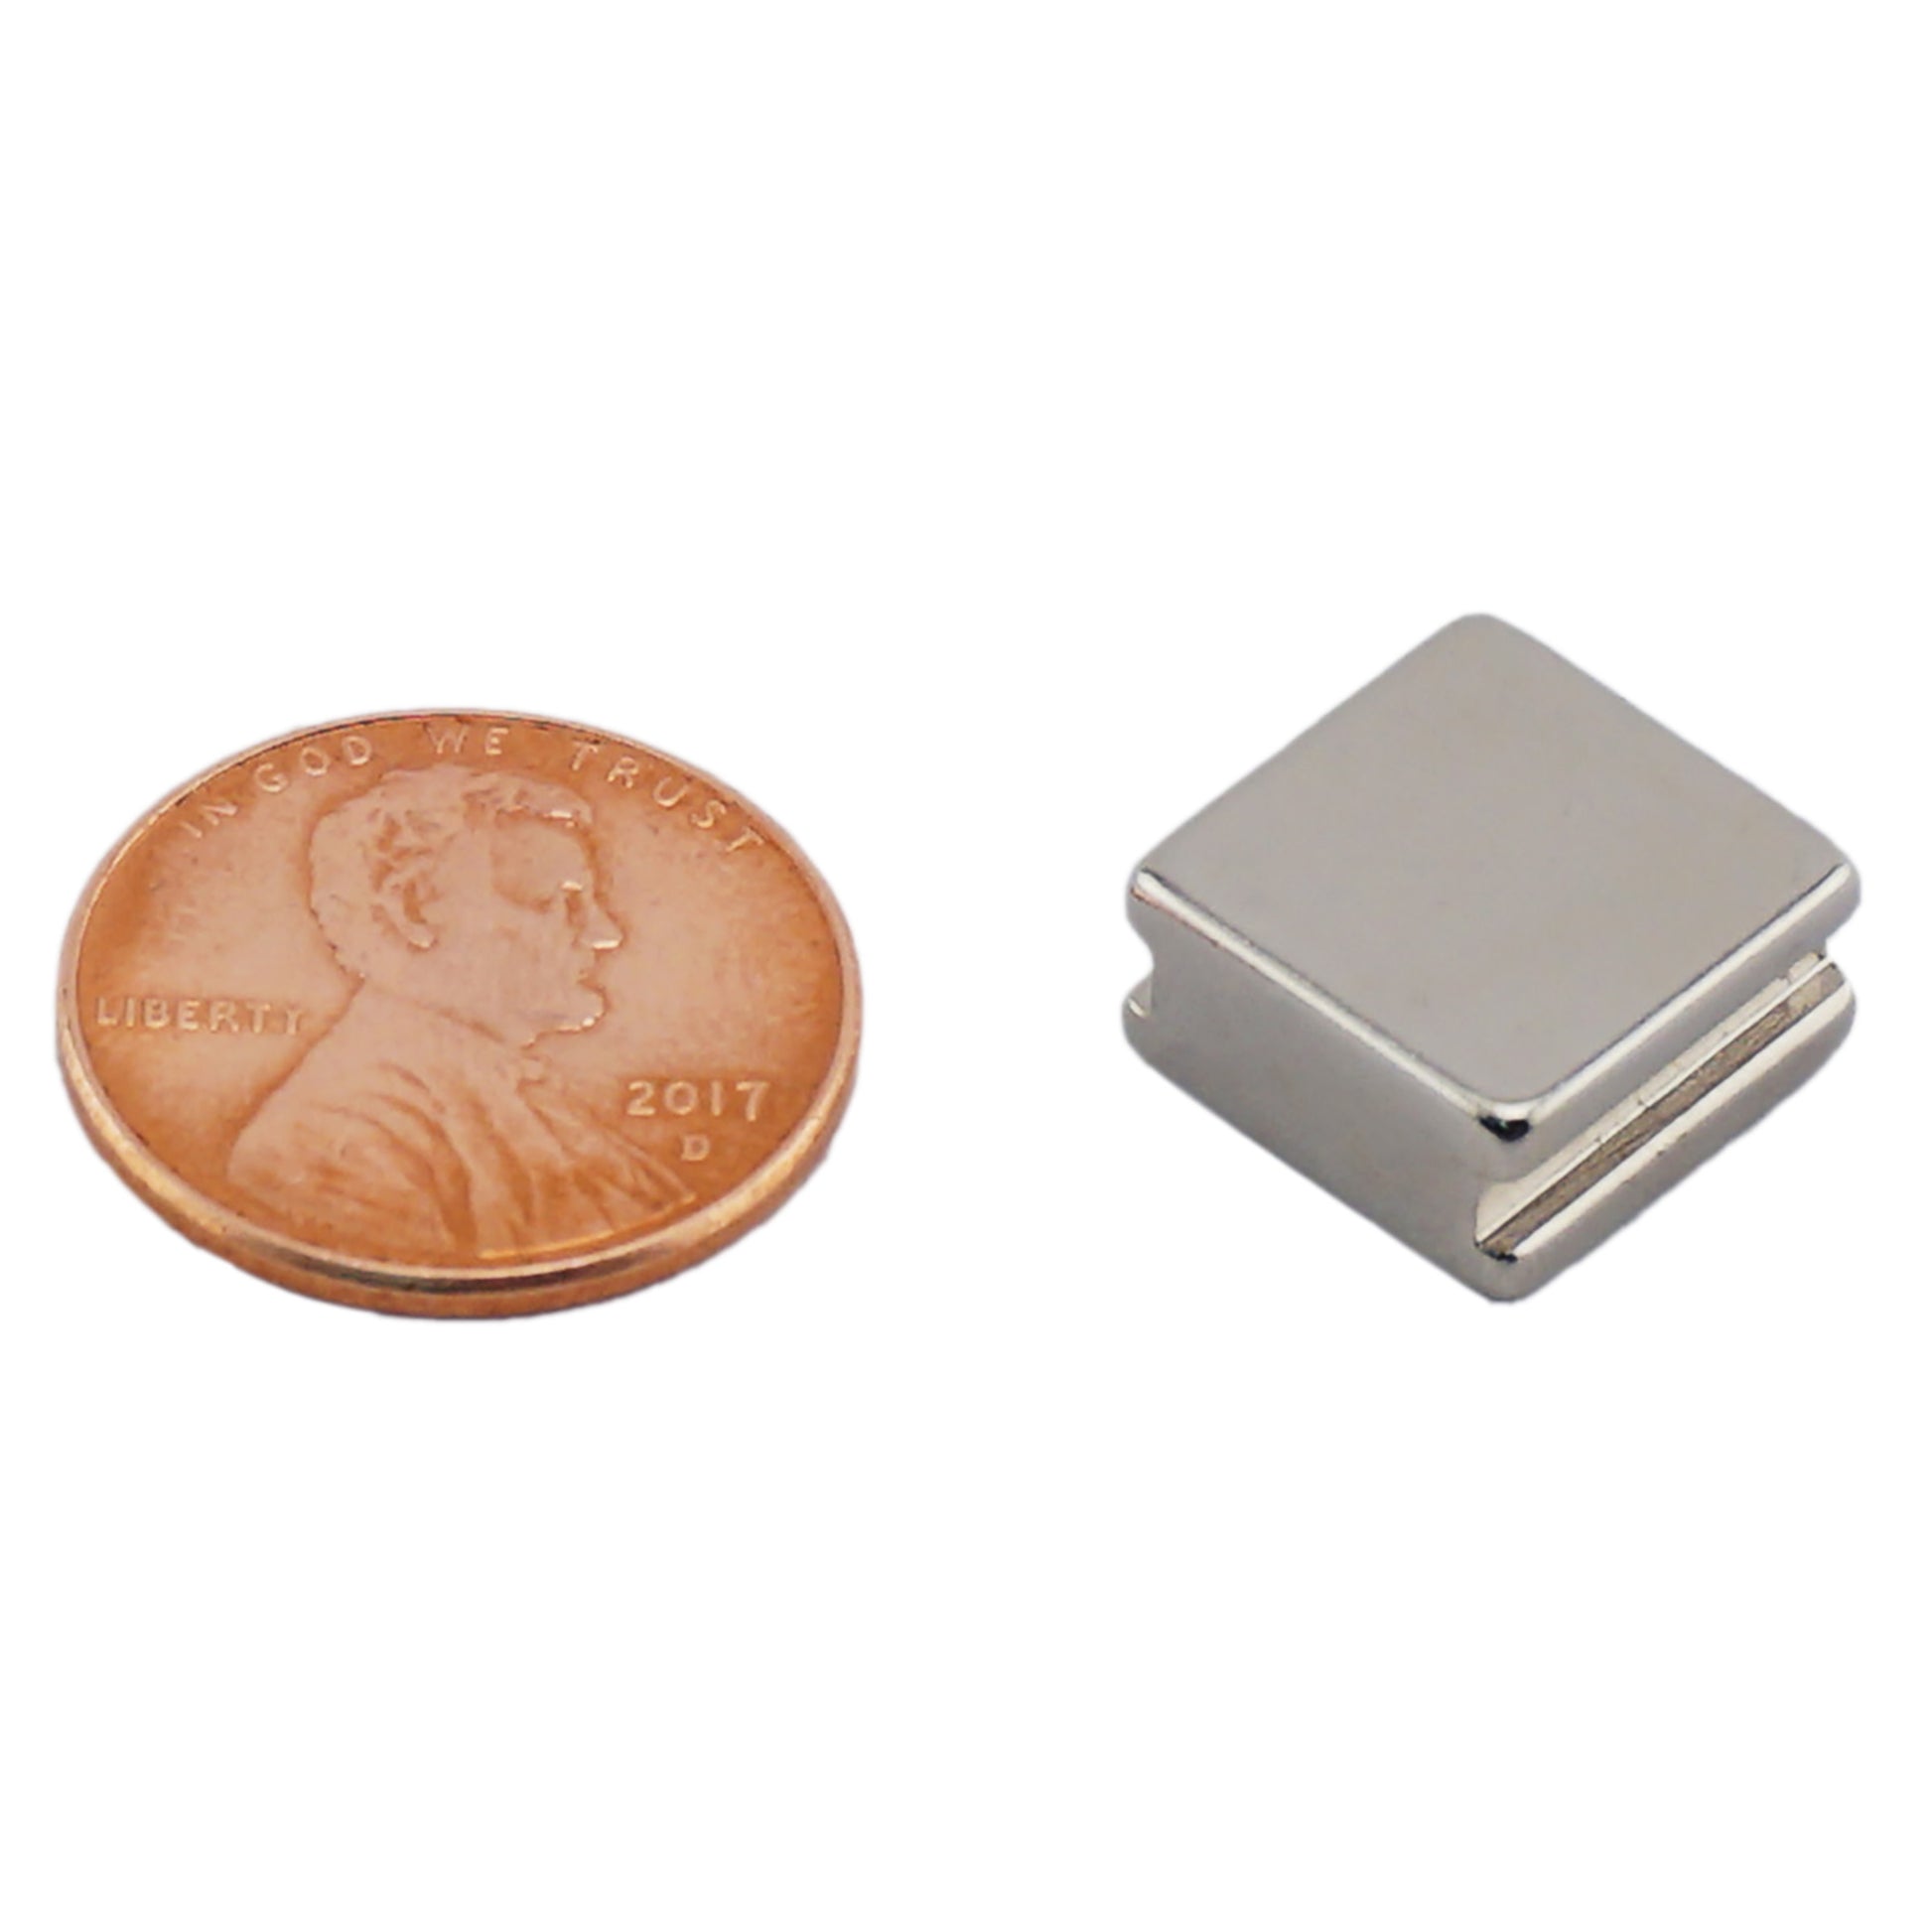 Load image into Gallery viewer, NBGI002501N Neodymium Block Magnet with groove - Compared to Penny for Size Reference